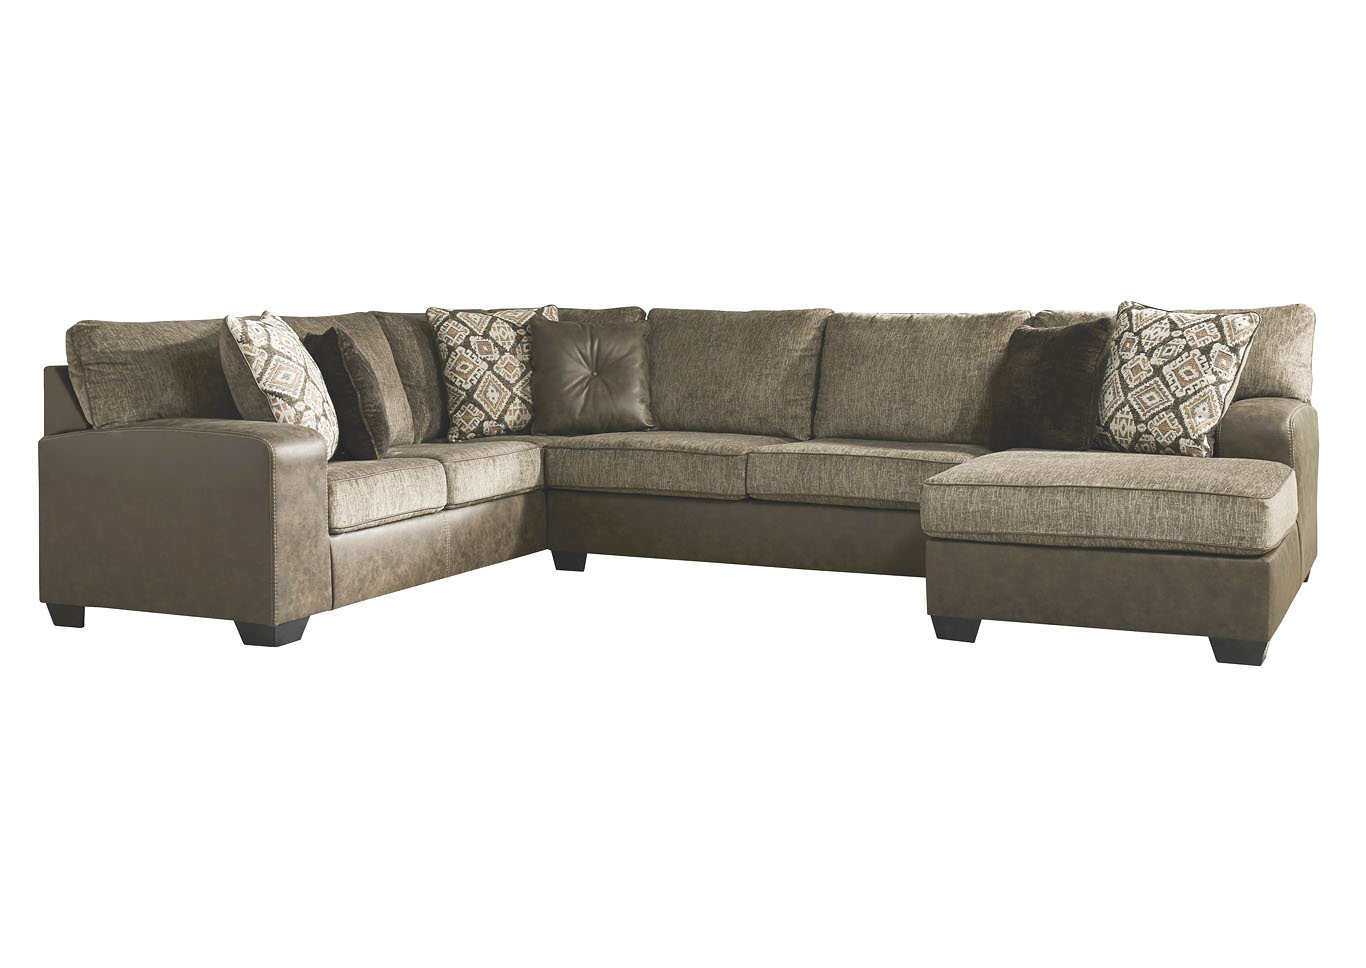 Abalone Chocolate Chaise Sectional Ashley Furniture Homestore Independently Owned And Operated By Appliance World Ltd